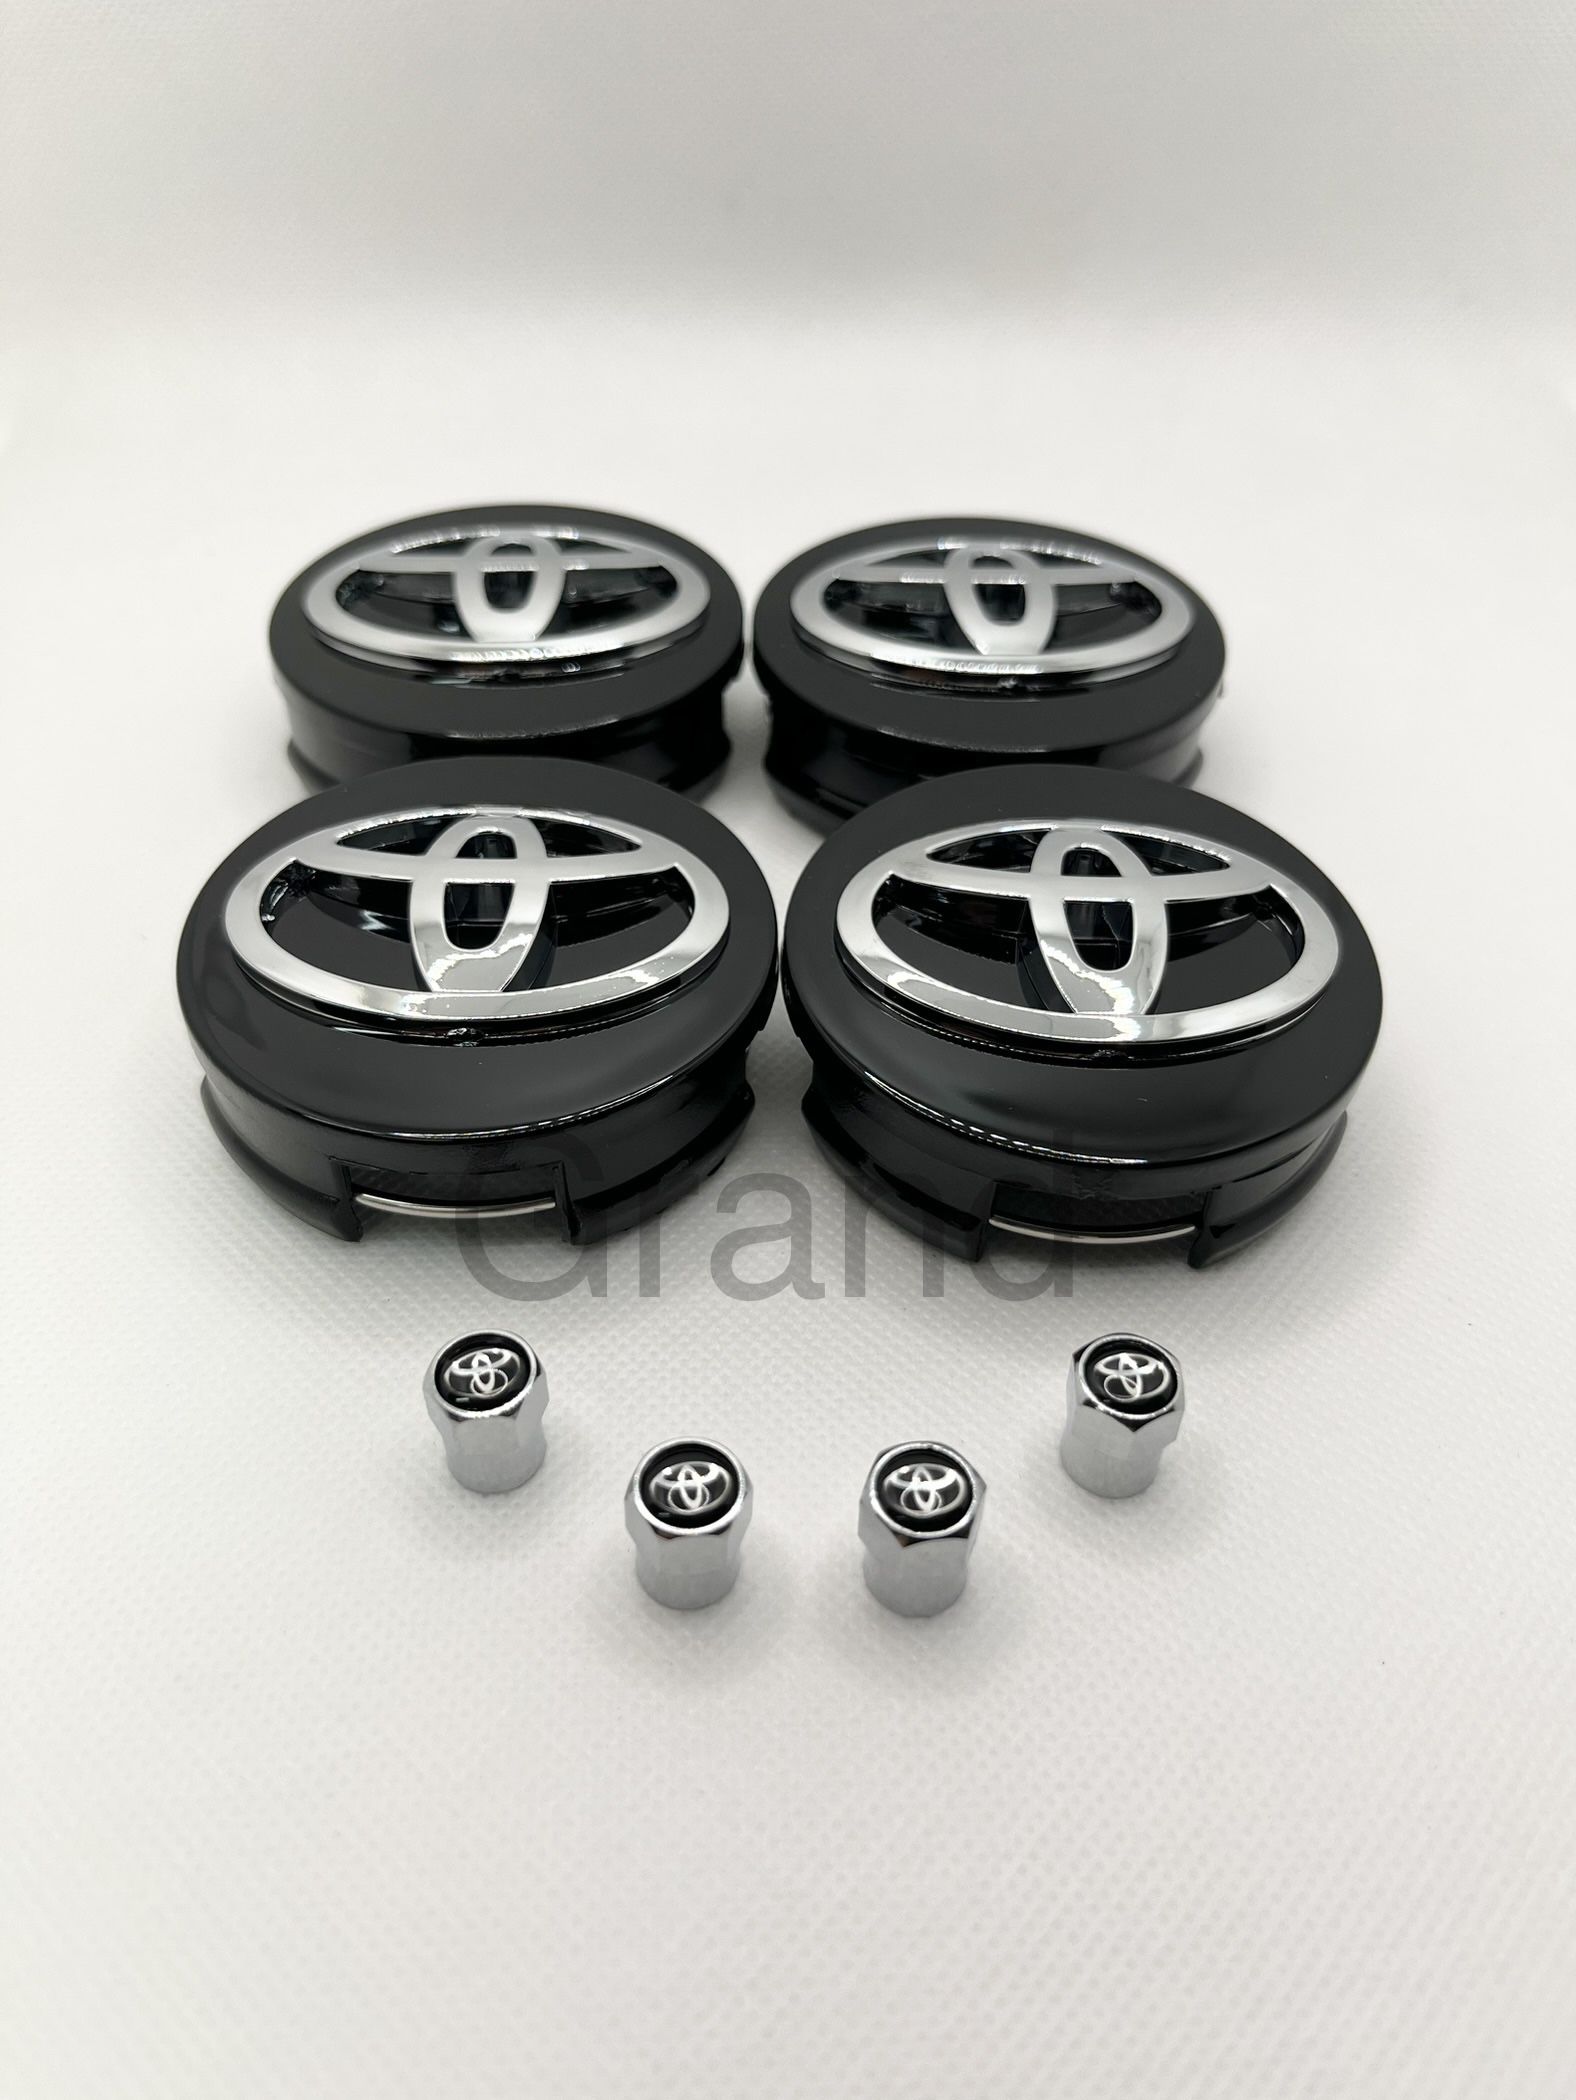 Set Of 8 Toyota Center Caps & Air Caps In Black 62mm Camry Avalon Corolla 